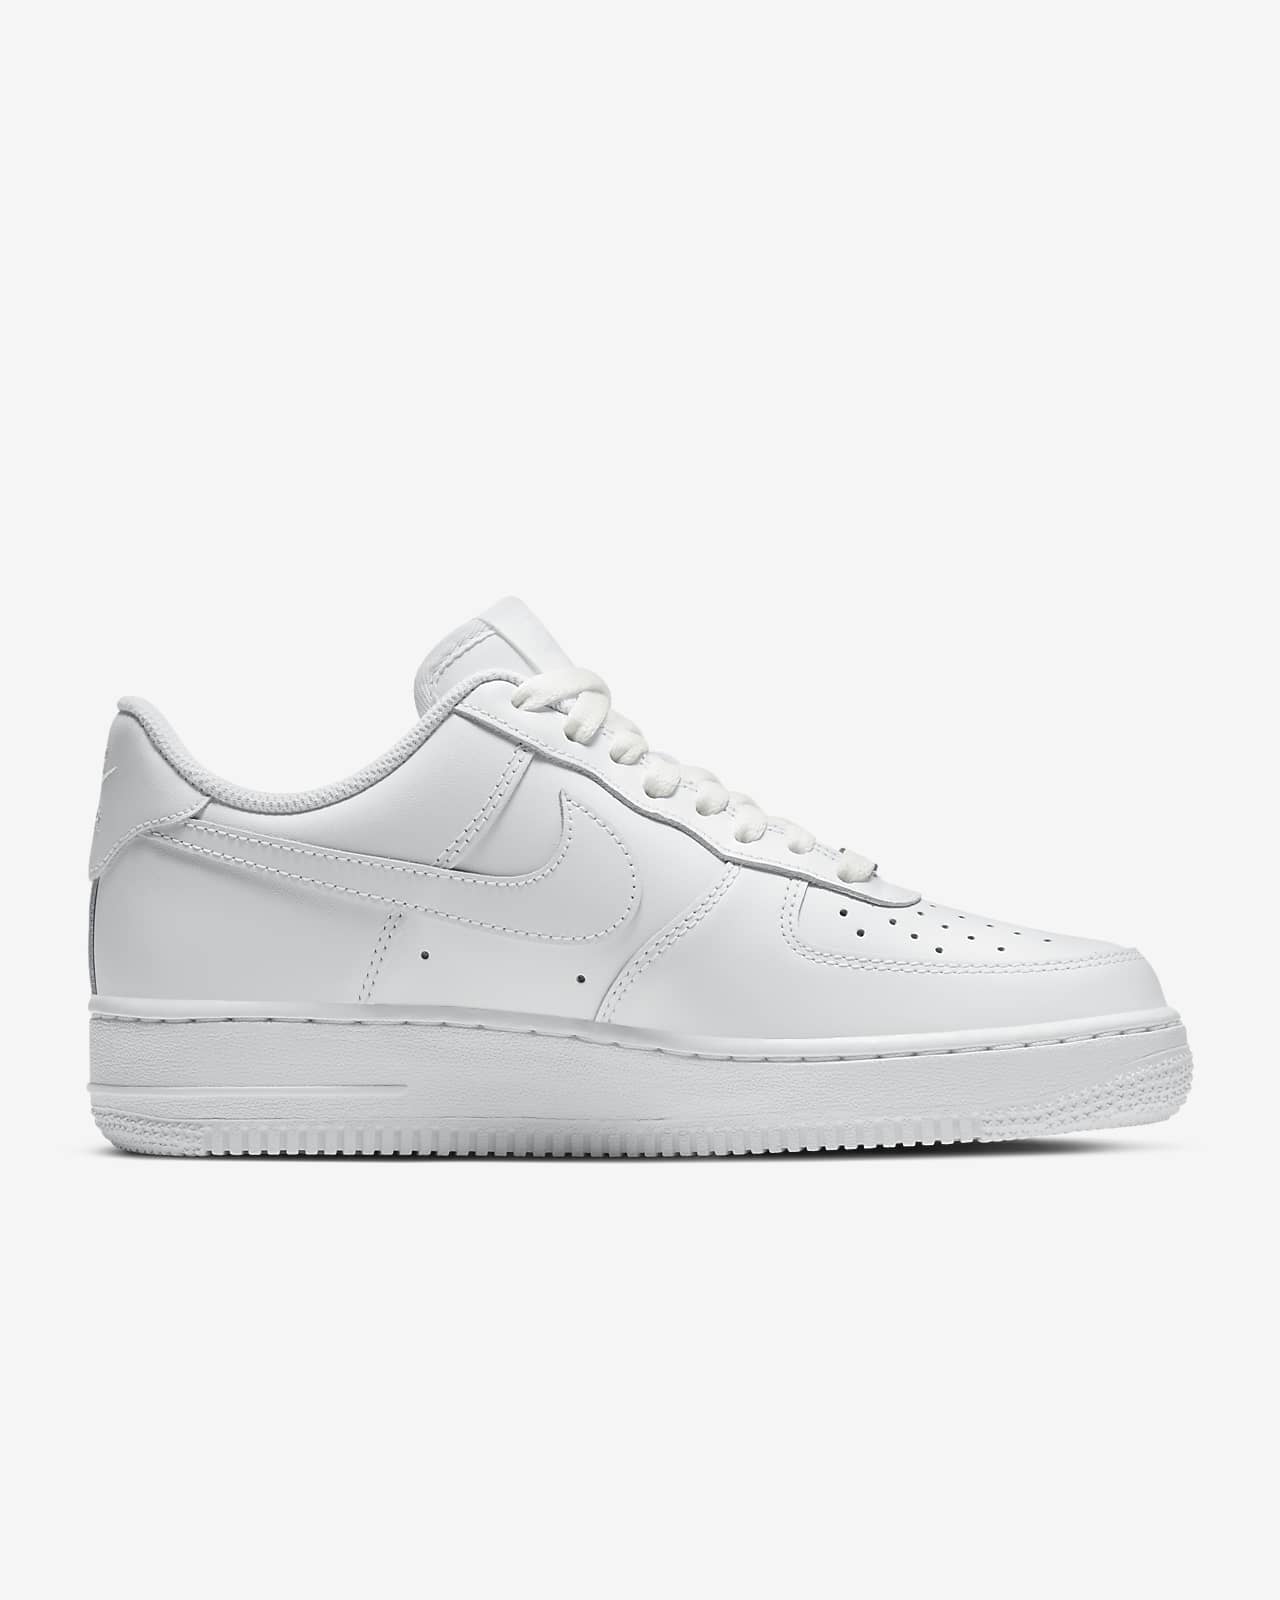 nike air force 1 07 womens size 9.5